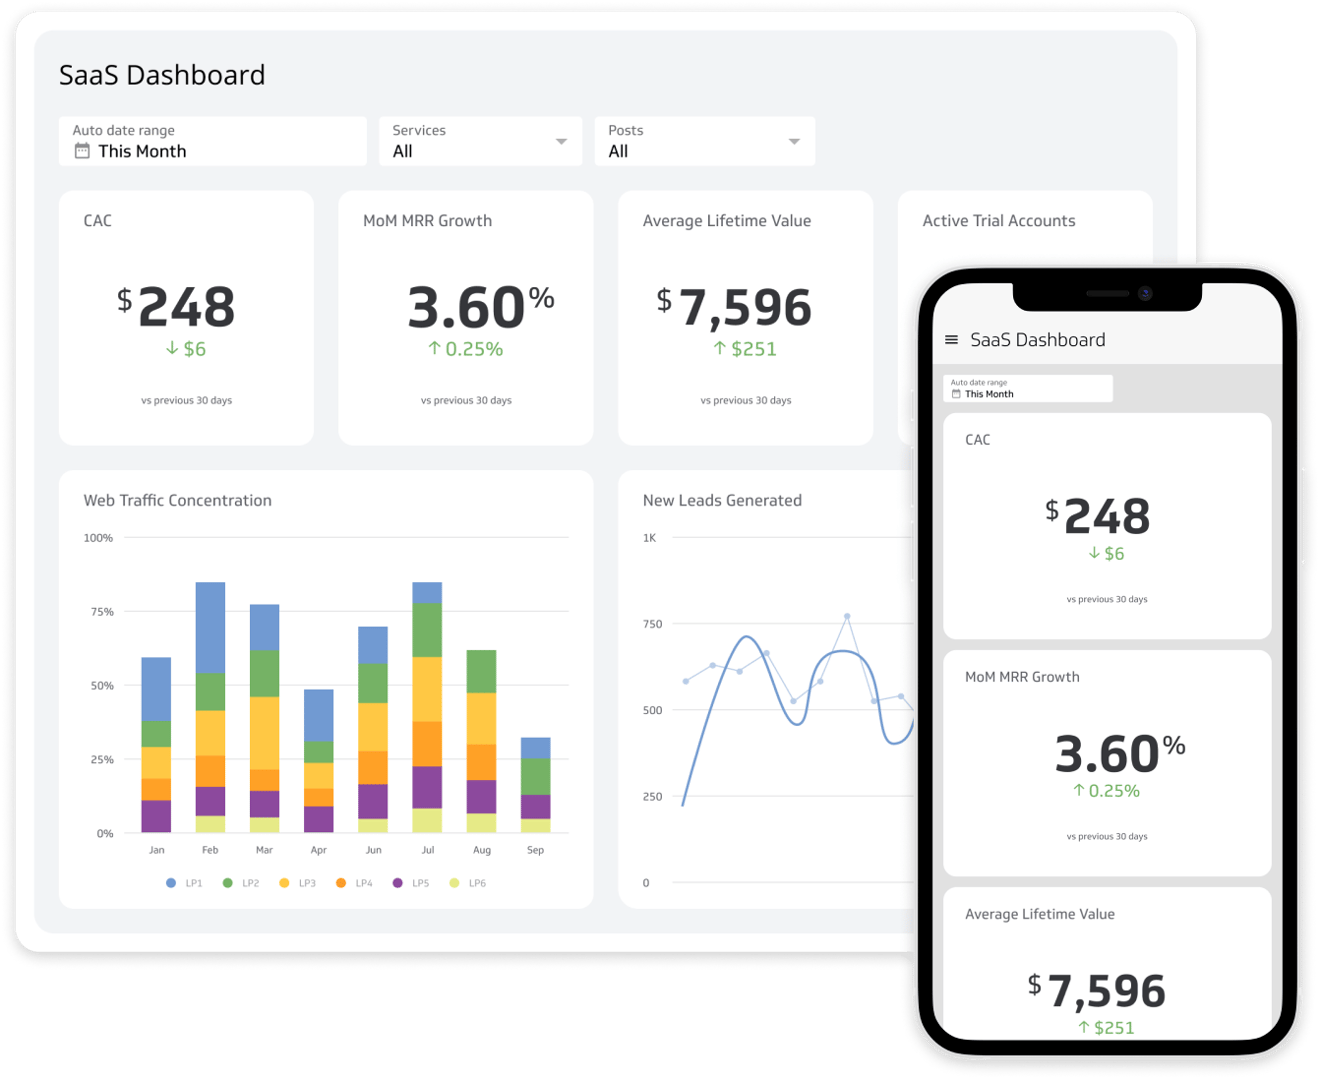 Access your dashboards and reports anywhere, anytime